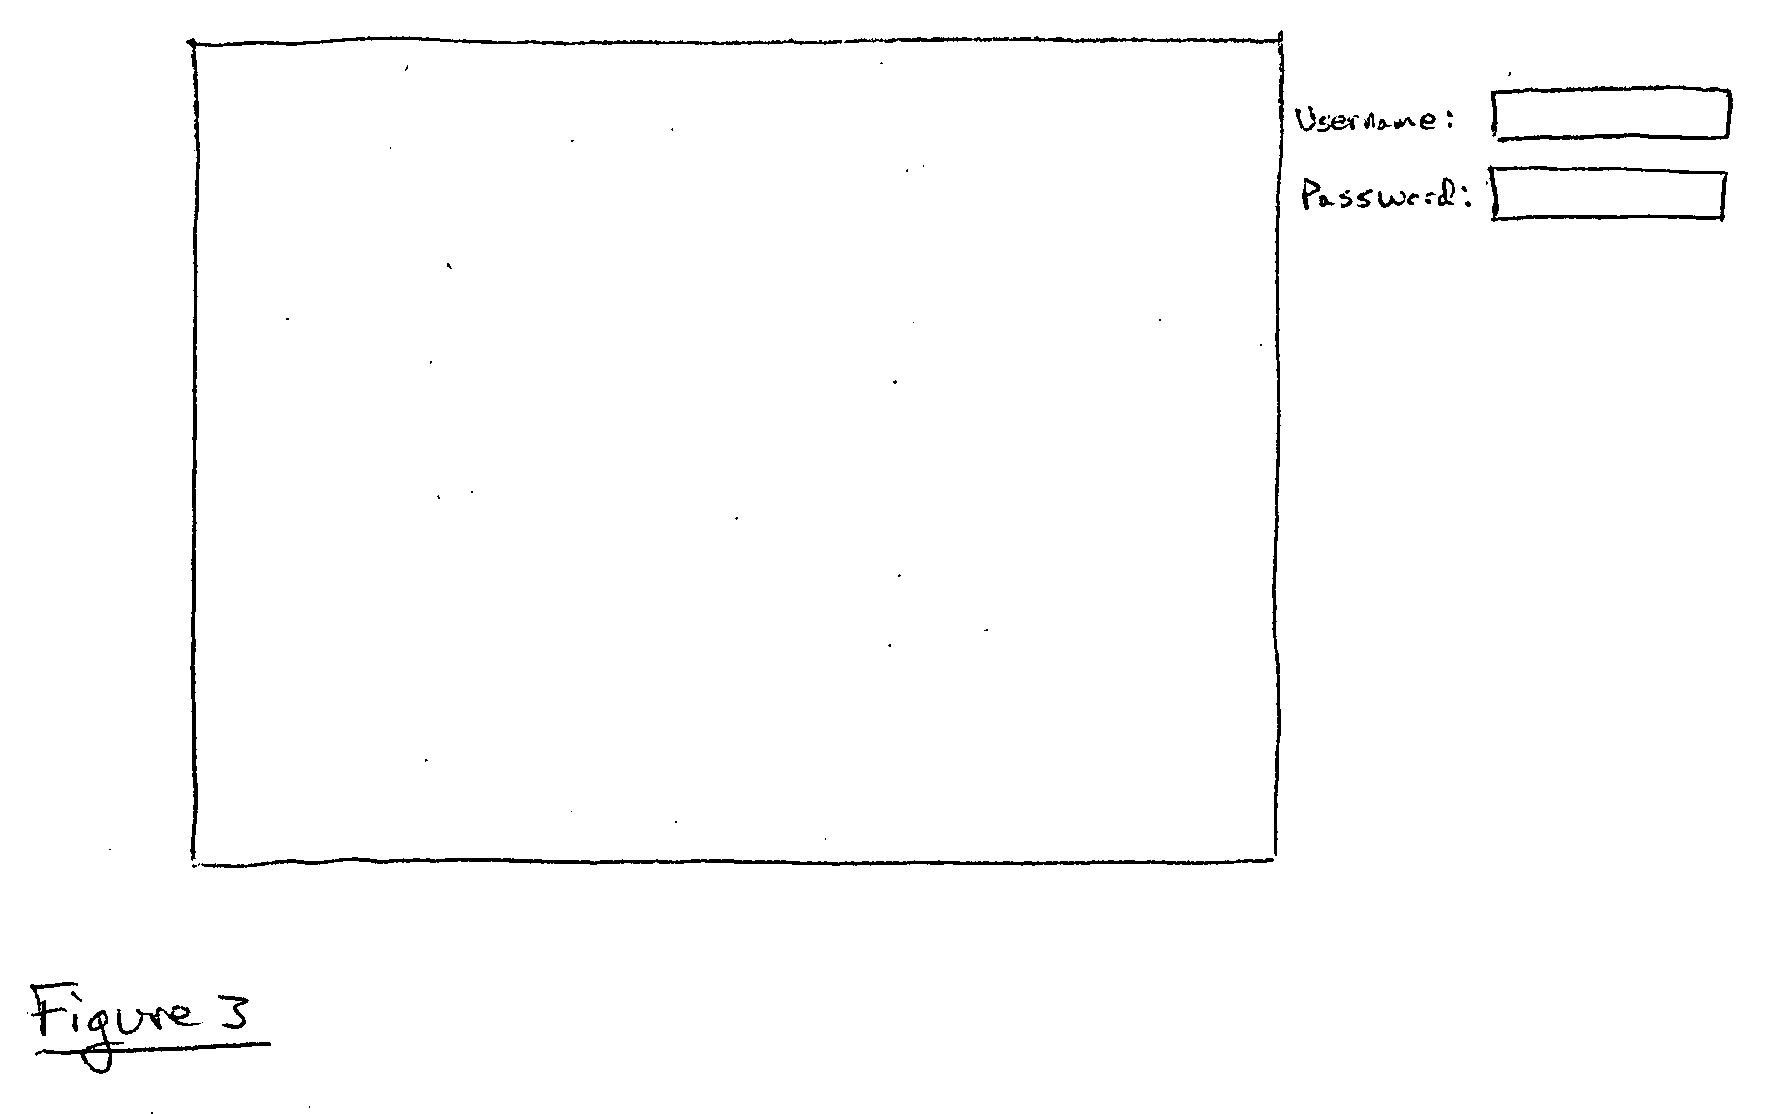 Method of scheduling appointment coverage for service professionals